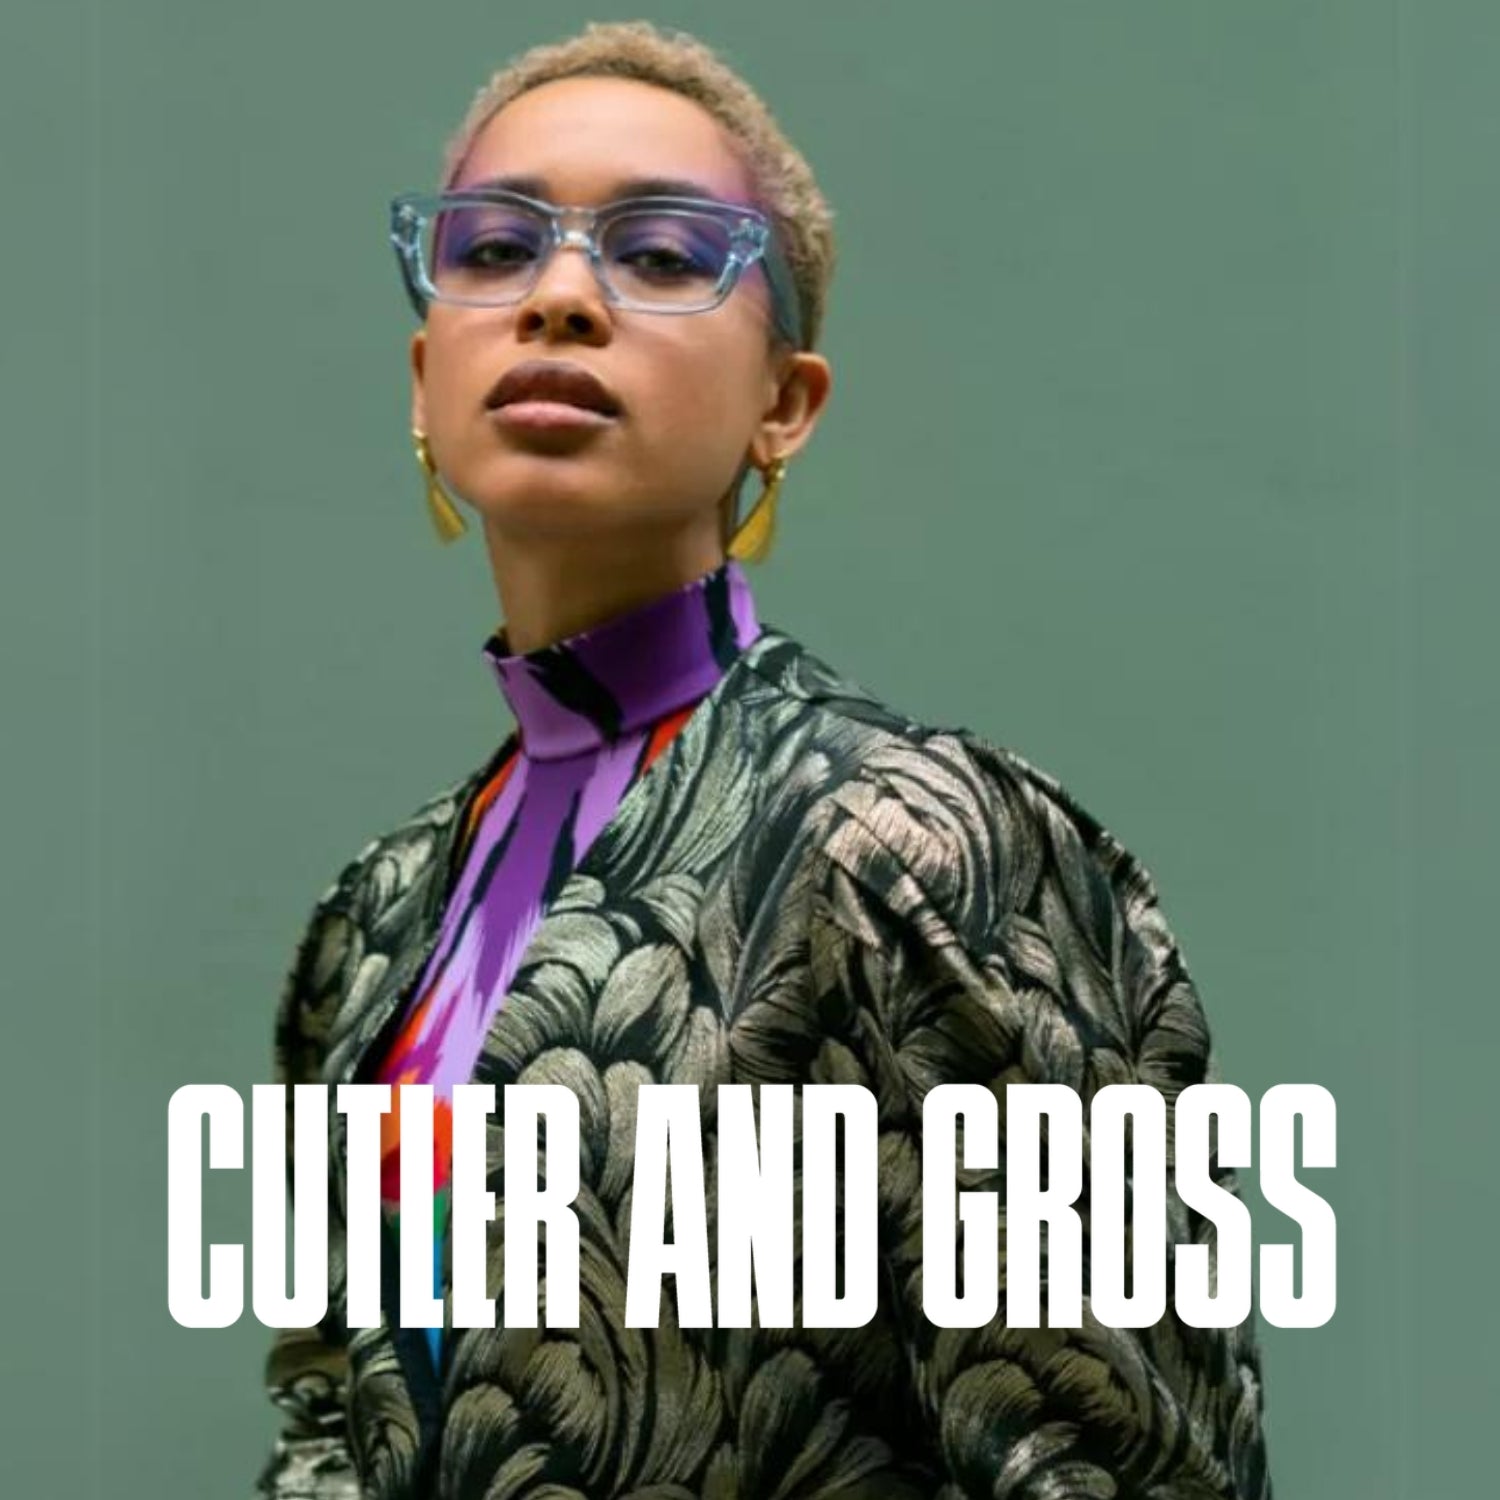 "A stylish collection of Cutler and Gross eyewear for spring/summer 2020, featuring sunglasses and opticals for both men and women.""